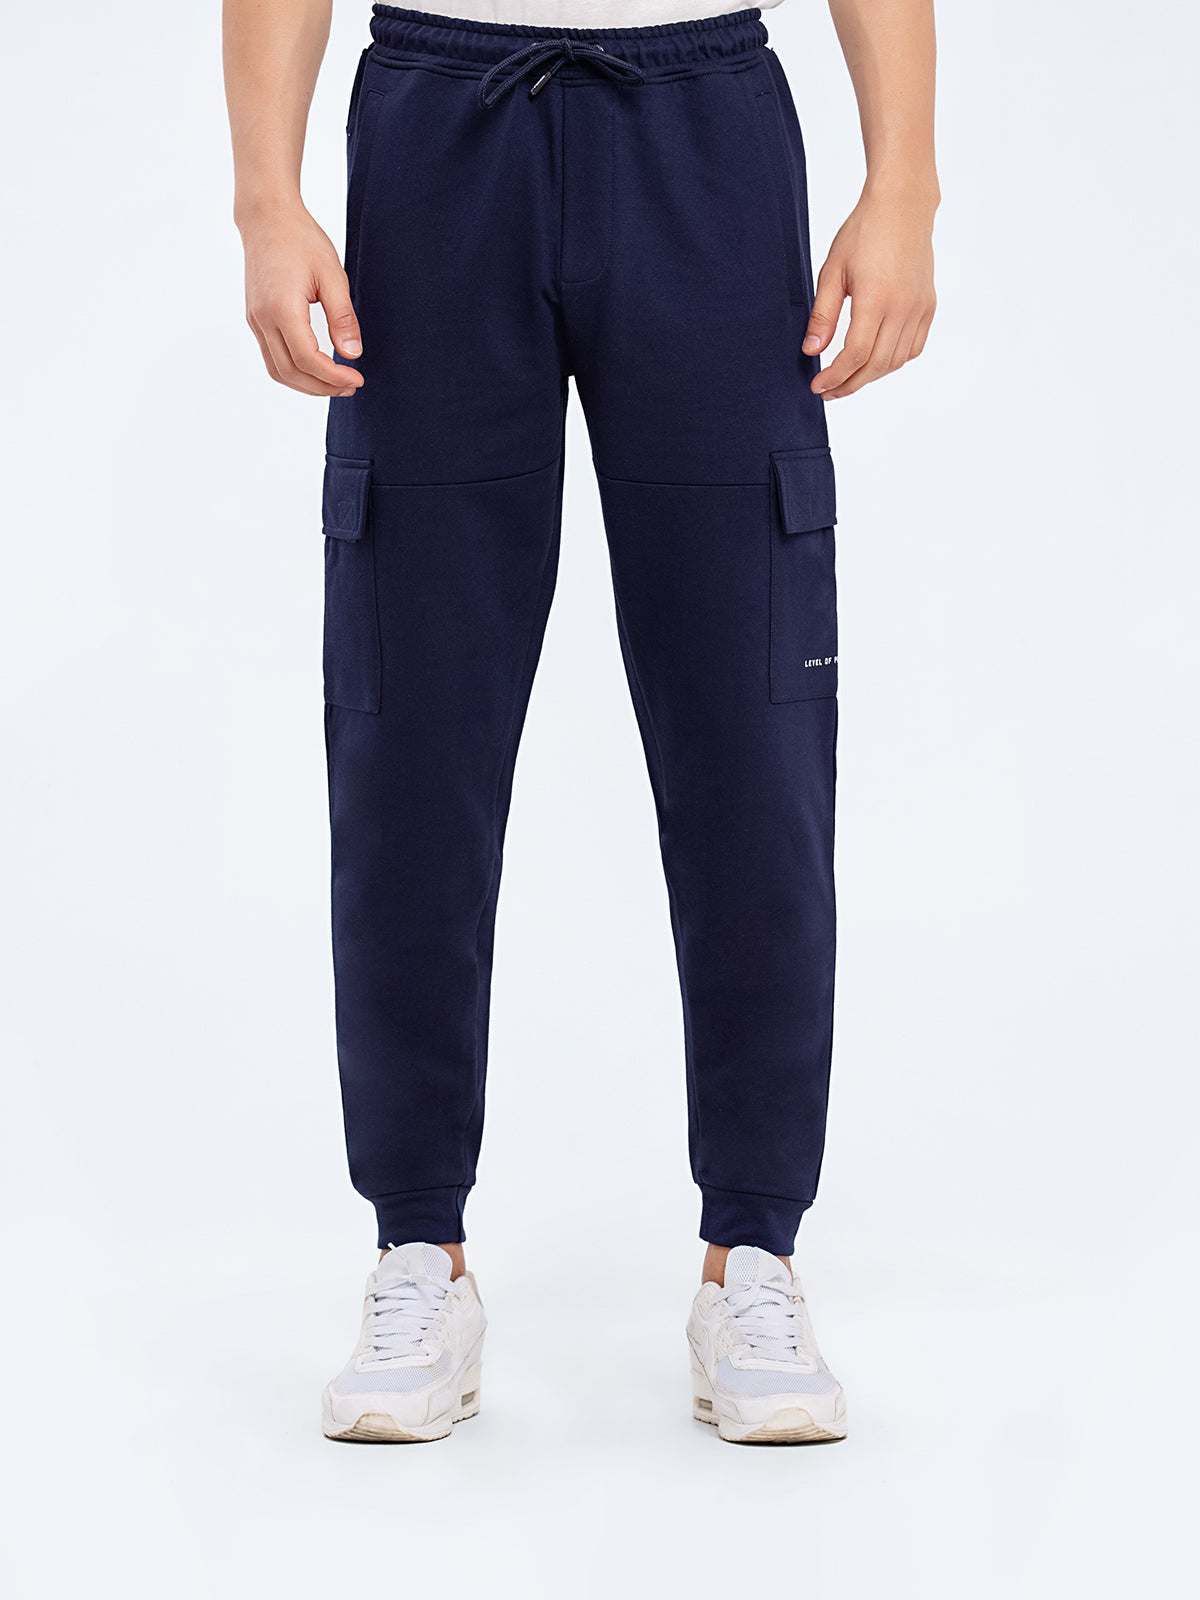 French Terry Jog Pant - FMBT24-010